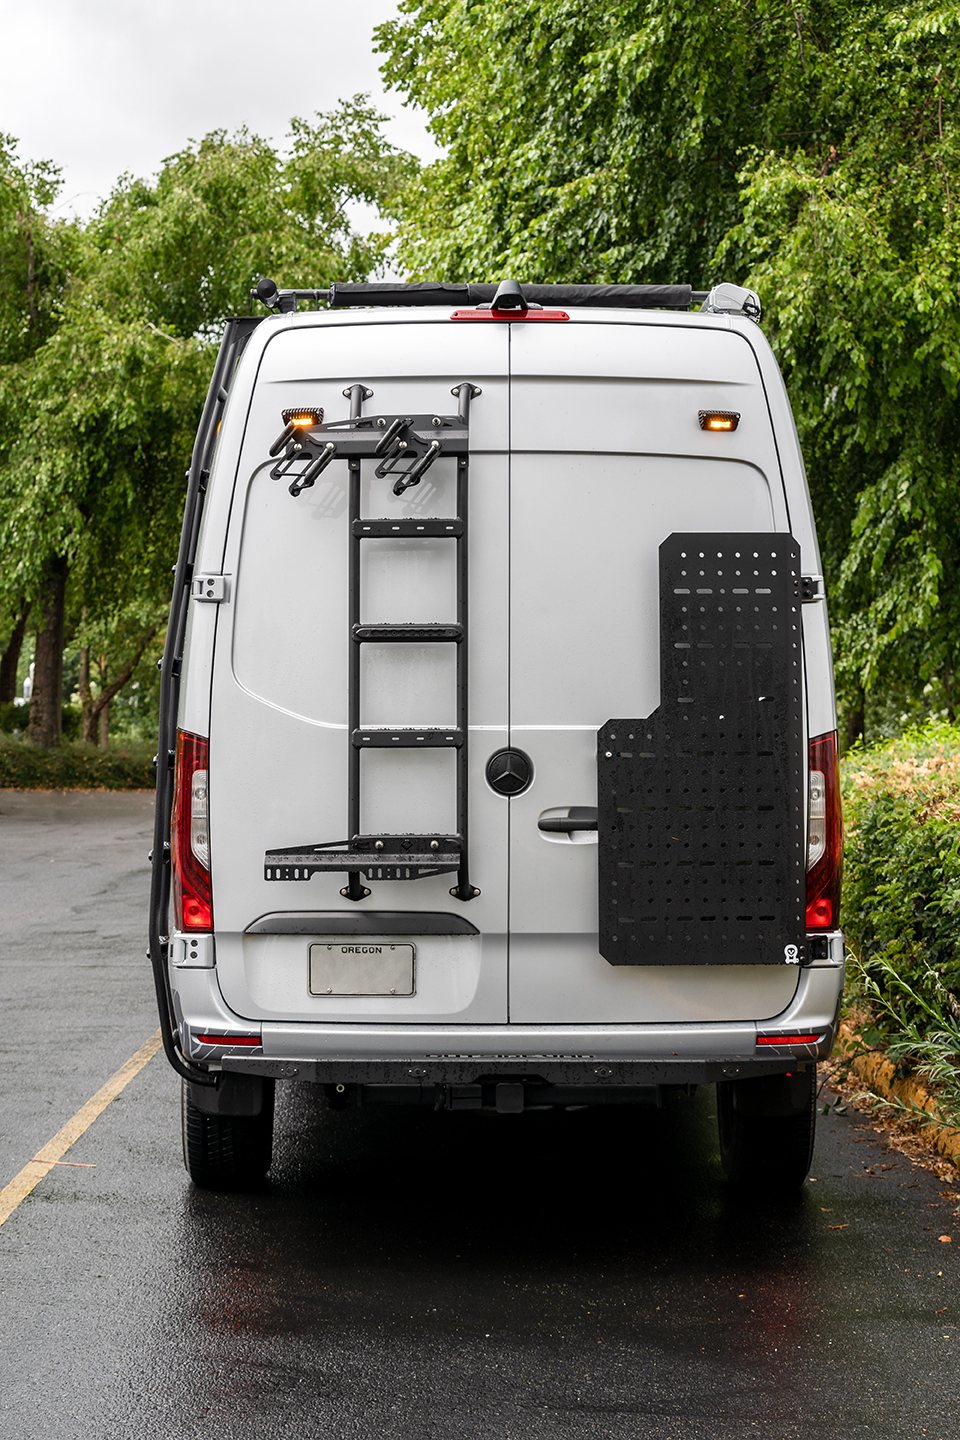 View of rear of the Sprinter van, rear Utility ladder, Owl Sherpa